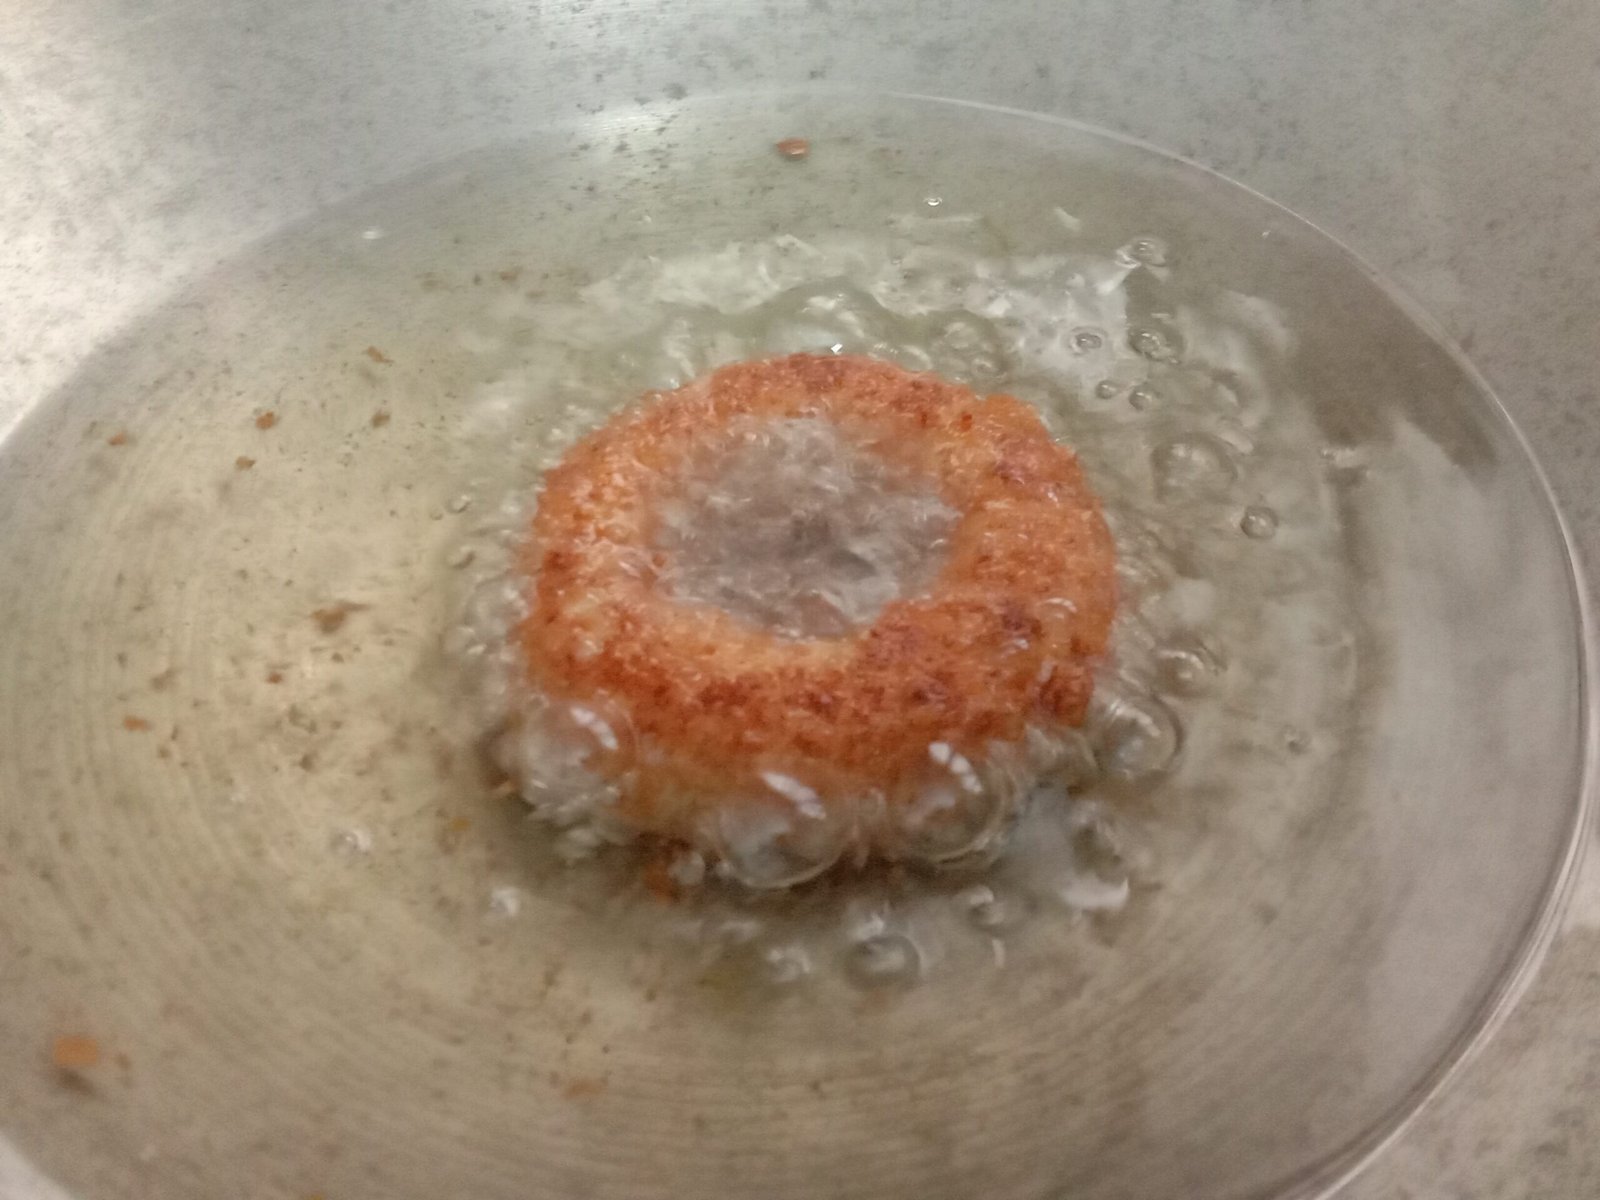 Frying the onion ring, Cheese onion rings recipe.